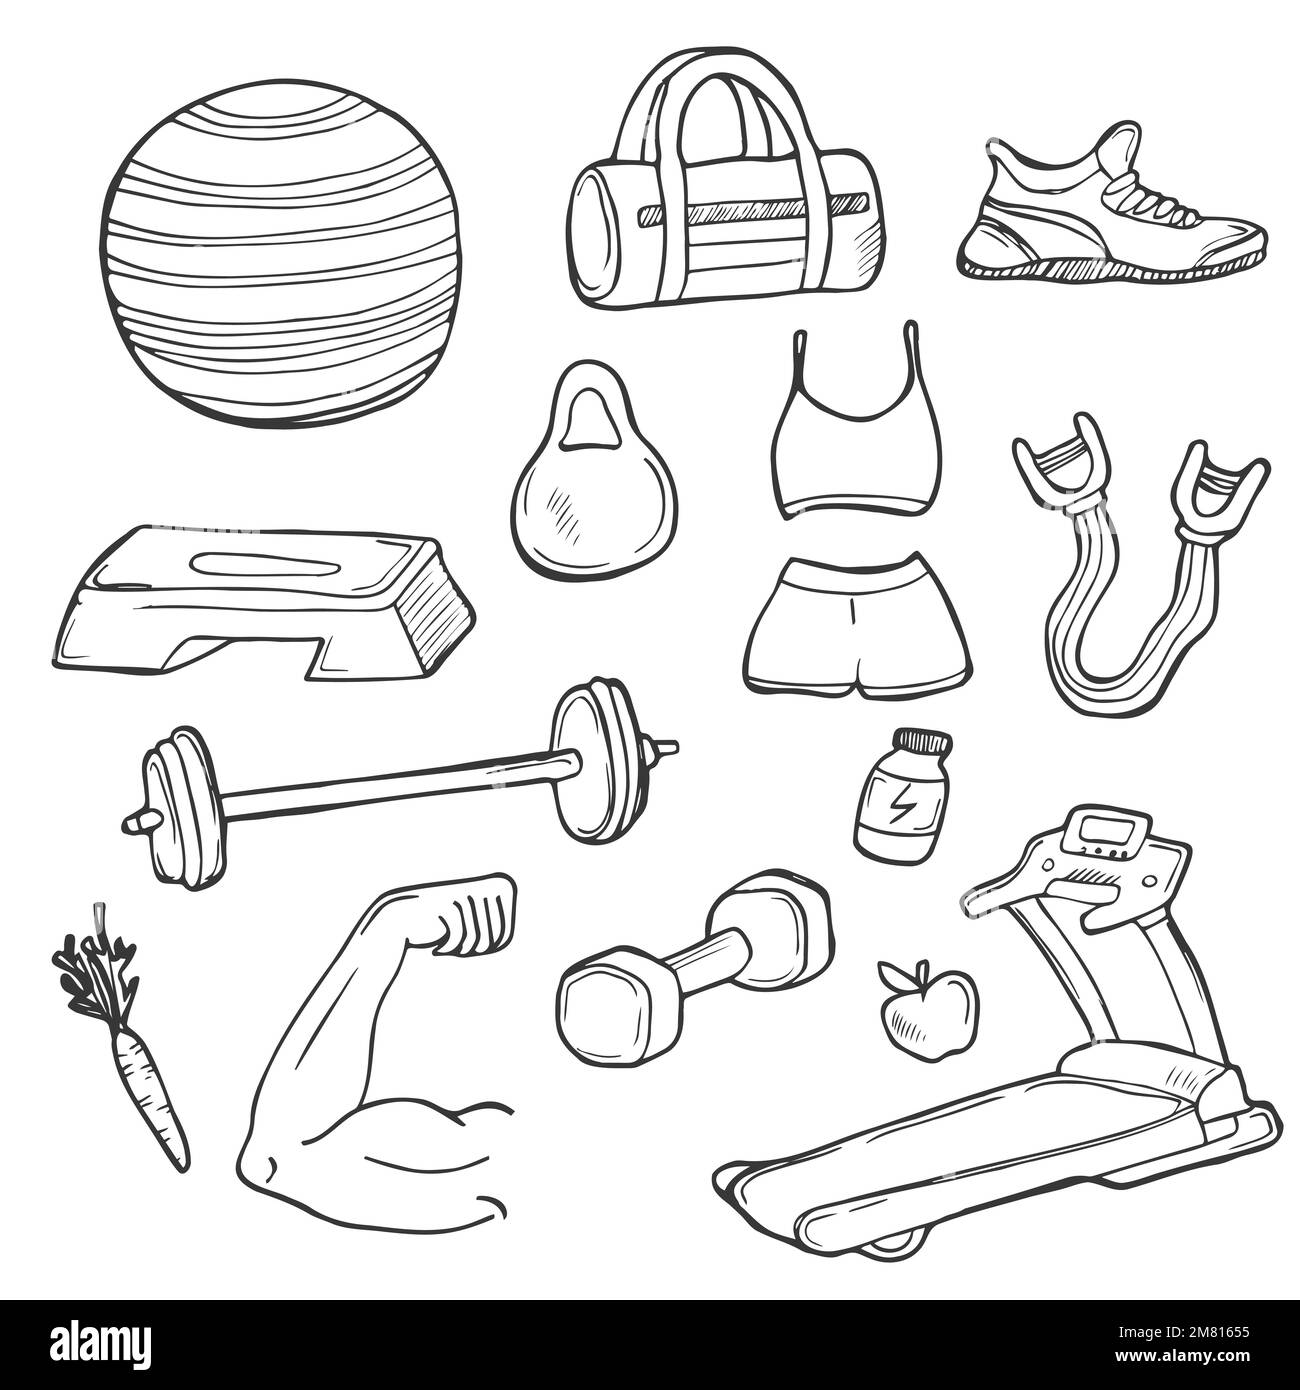 Fitness doodles set. Sport equipment, exercise machines and training accessories. Stock Vector